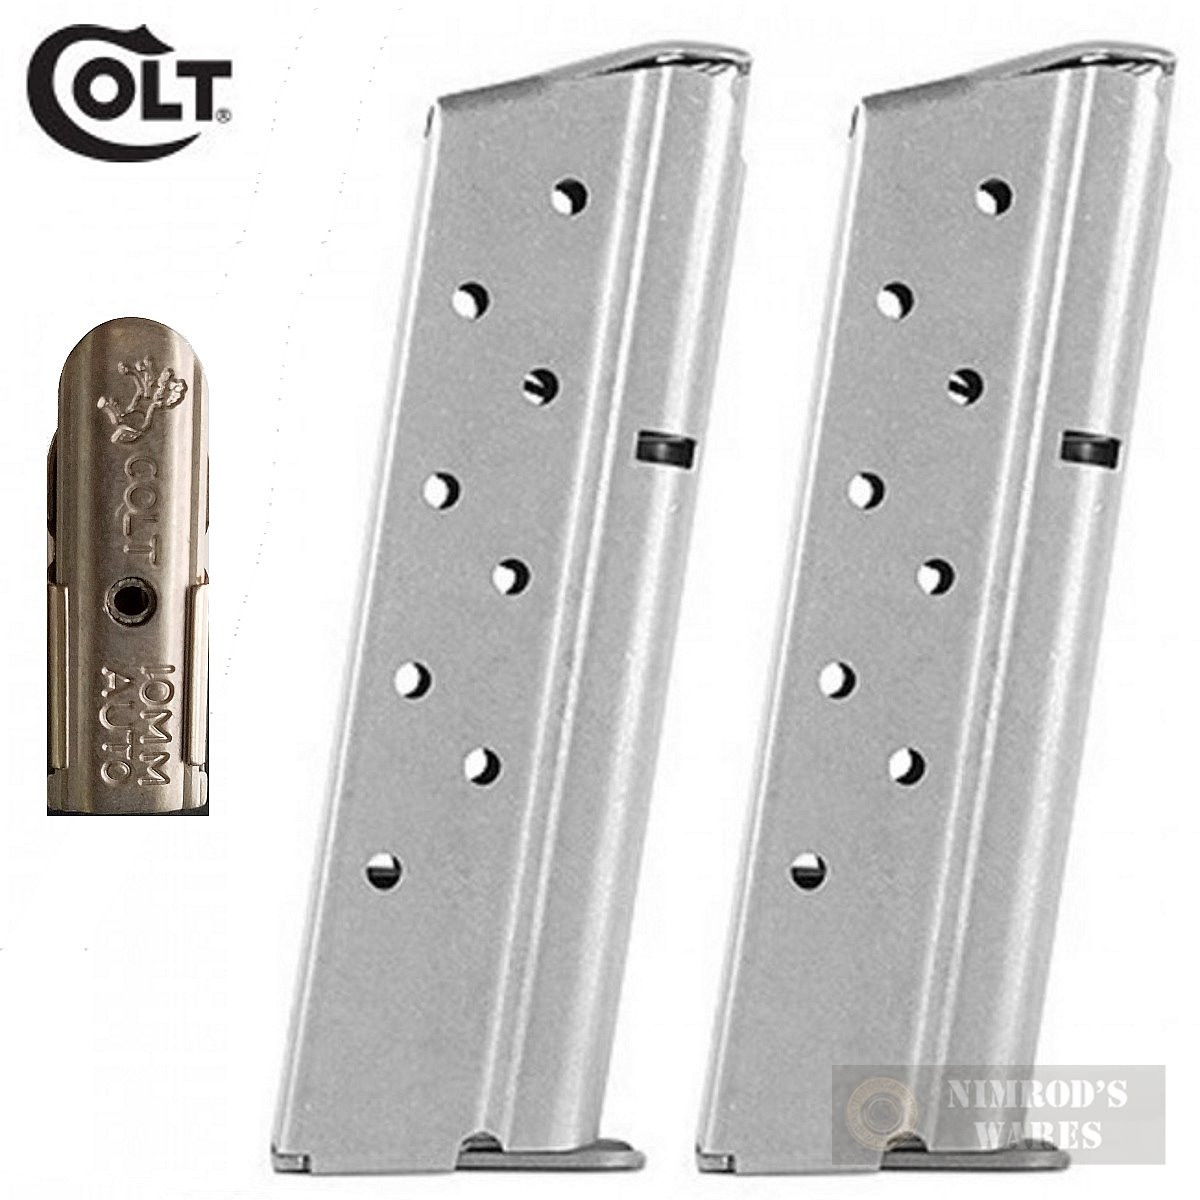 Factory Colt Magazine 10mm DELTA ELITE 8 Rd STAINLESS STEEL SS SP573421 10MM mag 